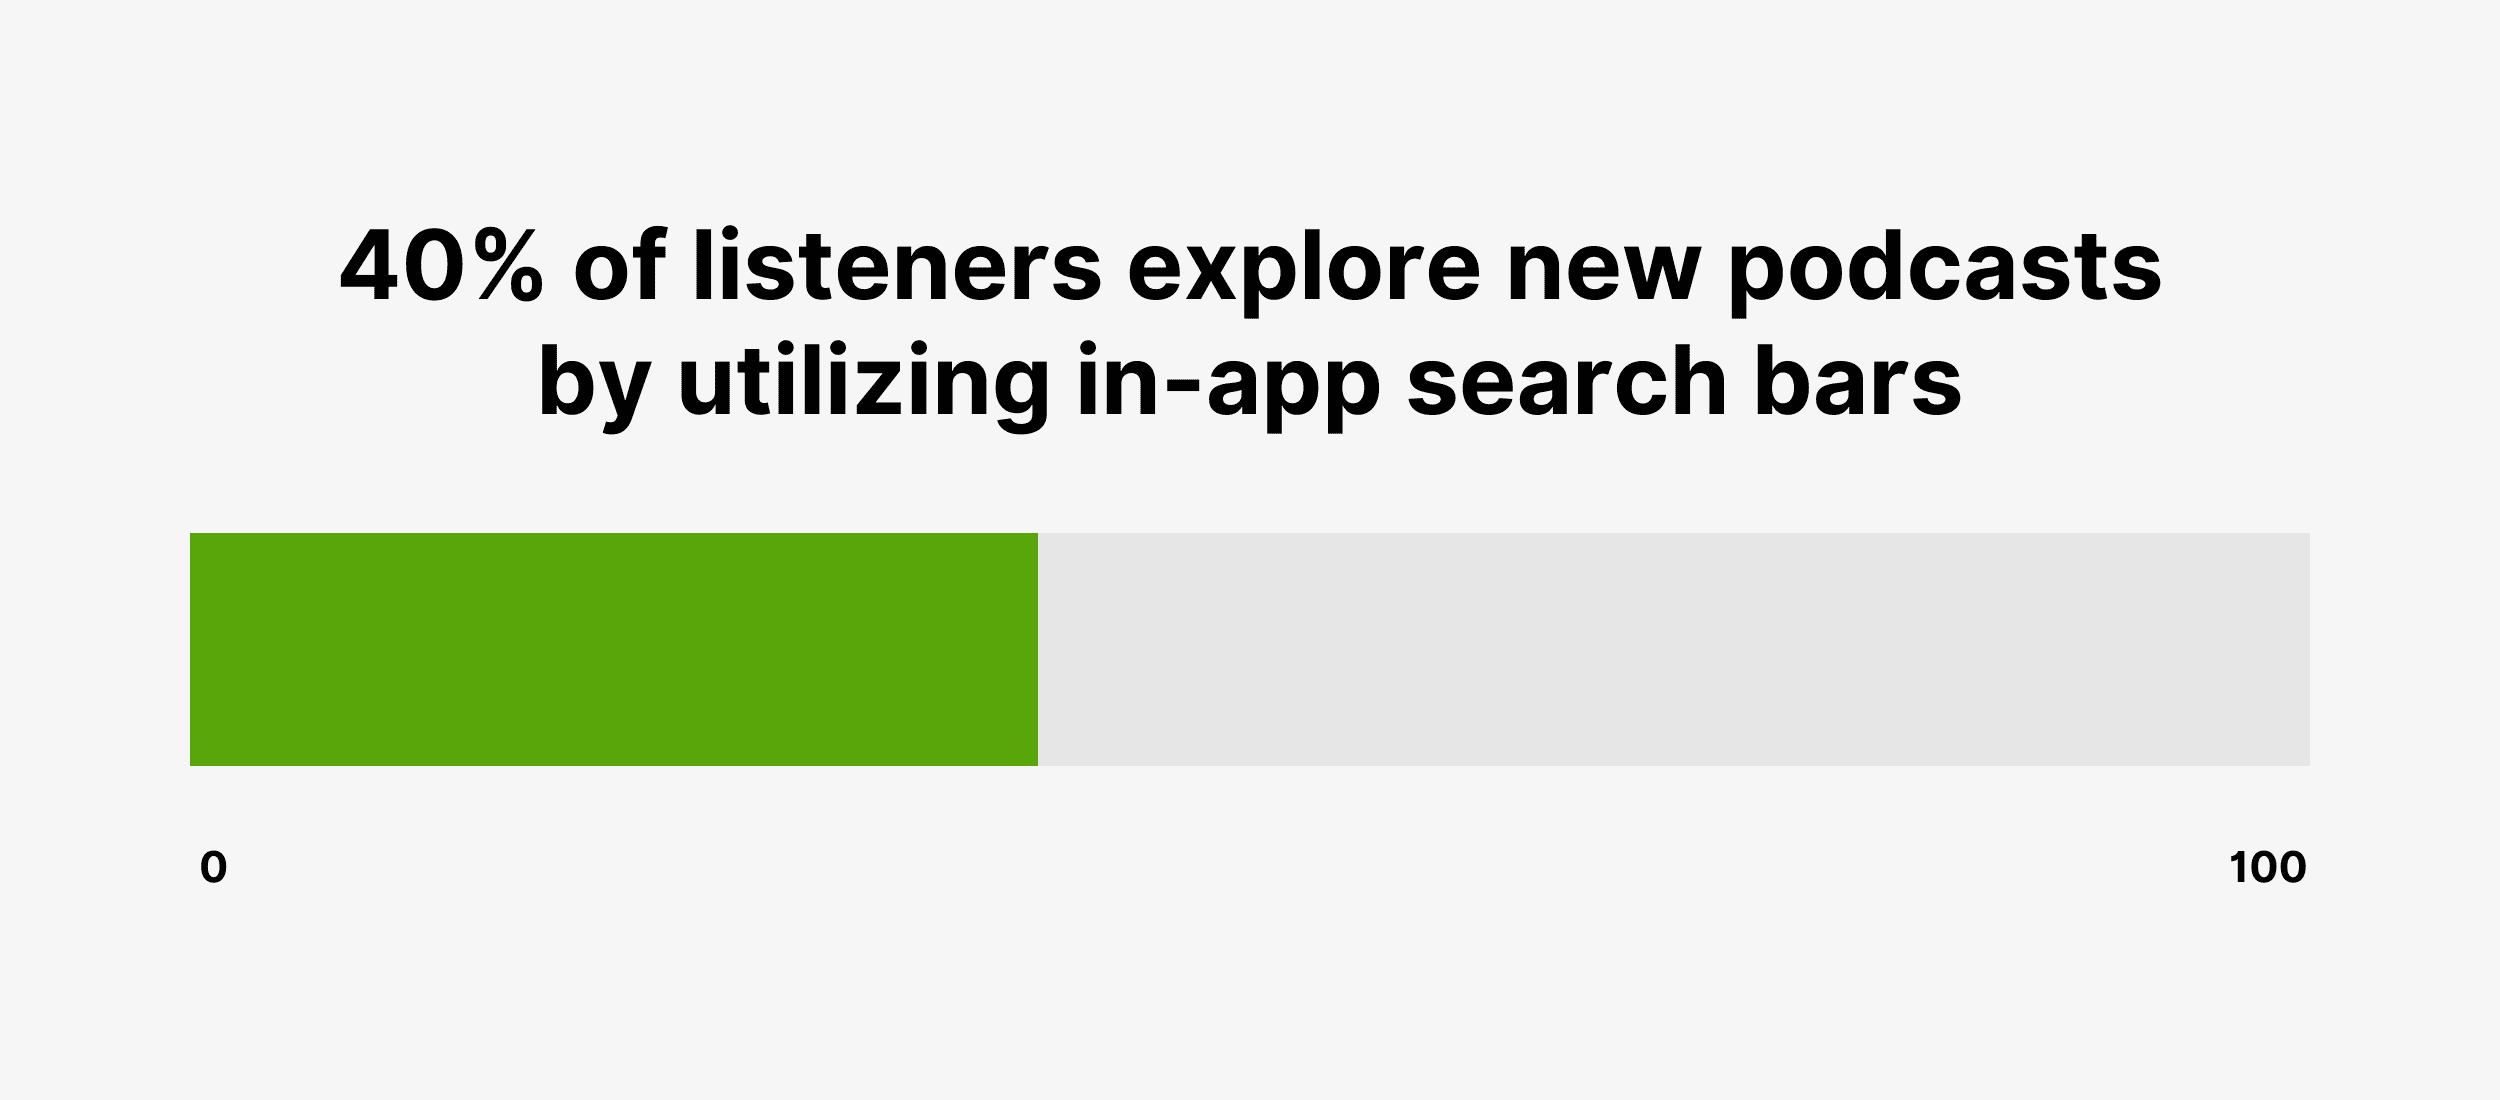 40% of listeners explore new podcasts by utilizing in-app search bars